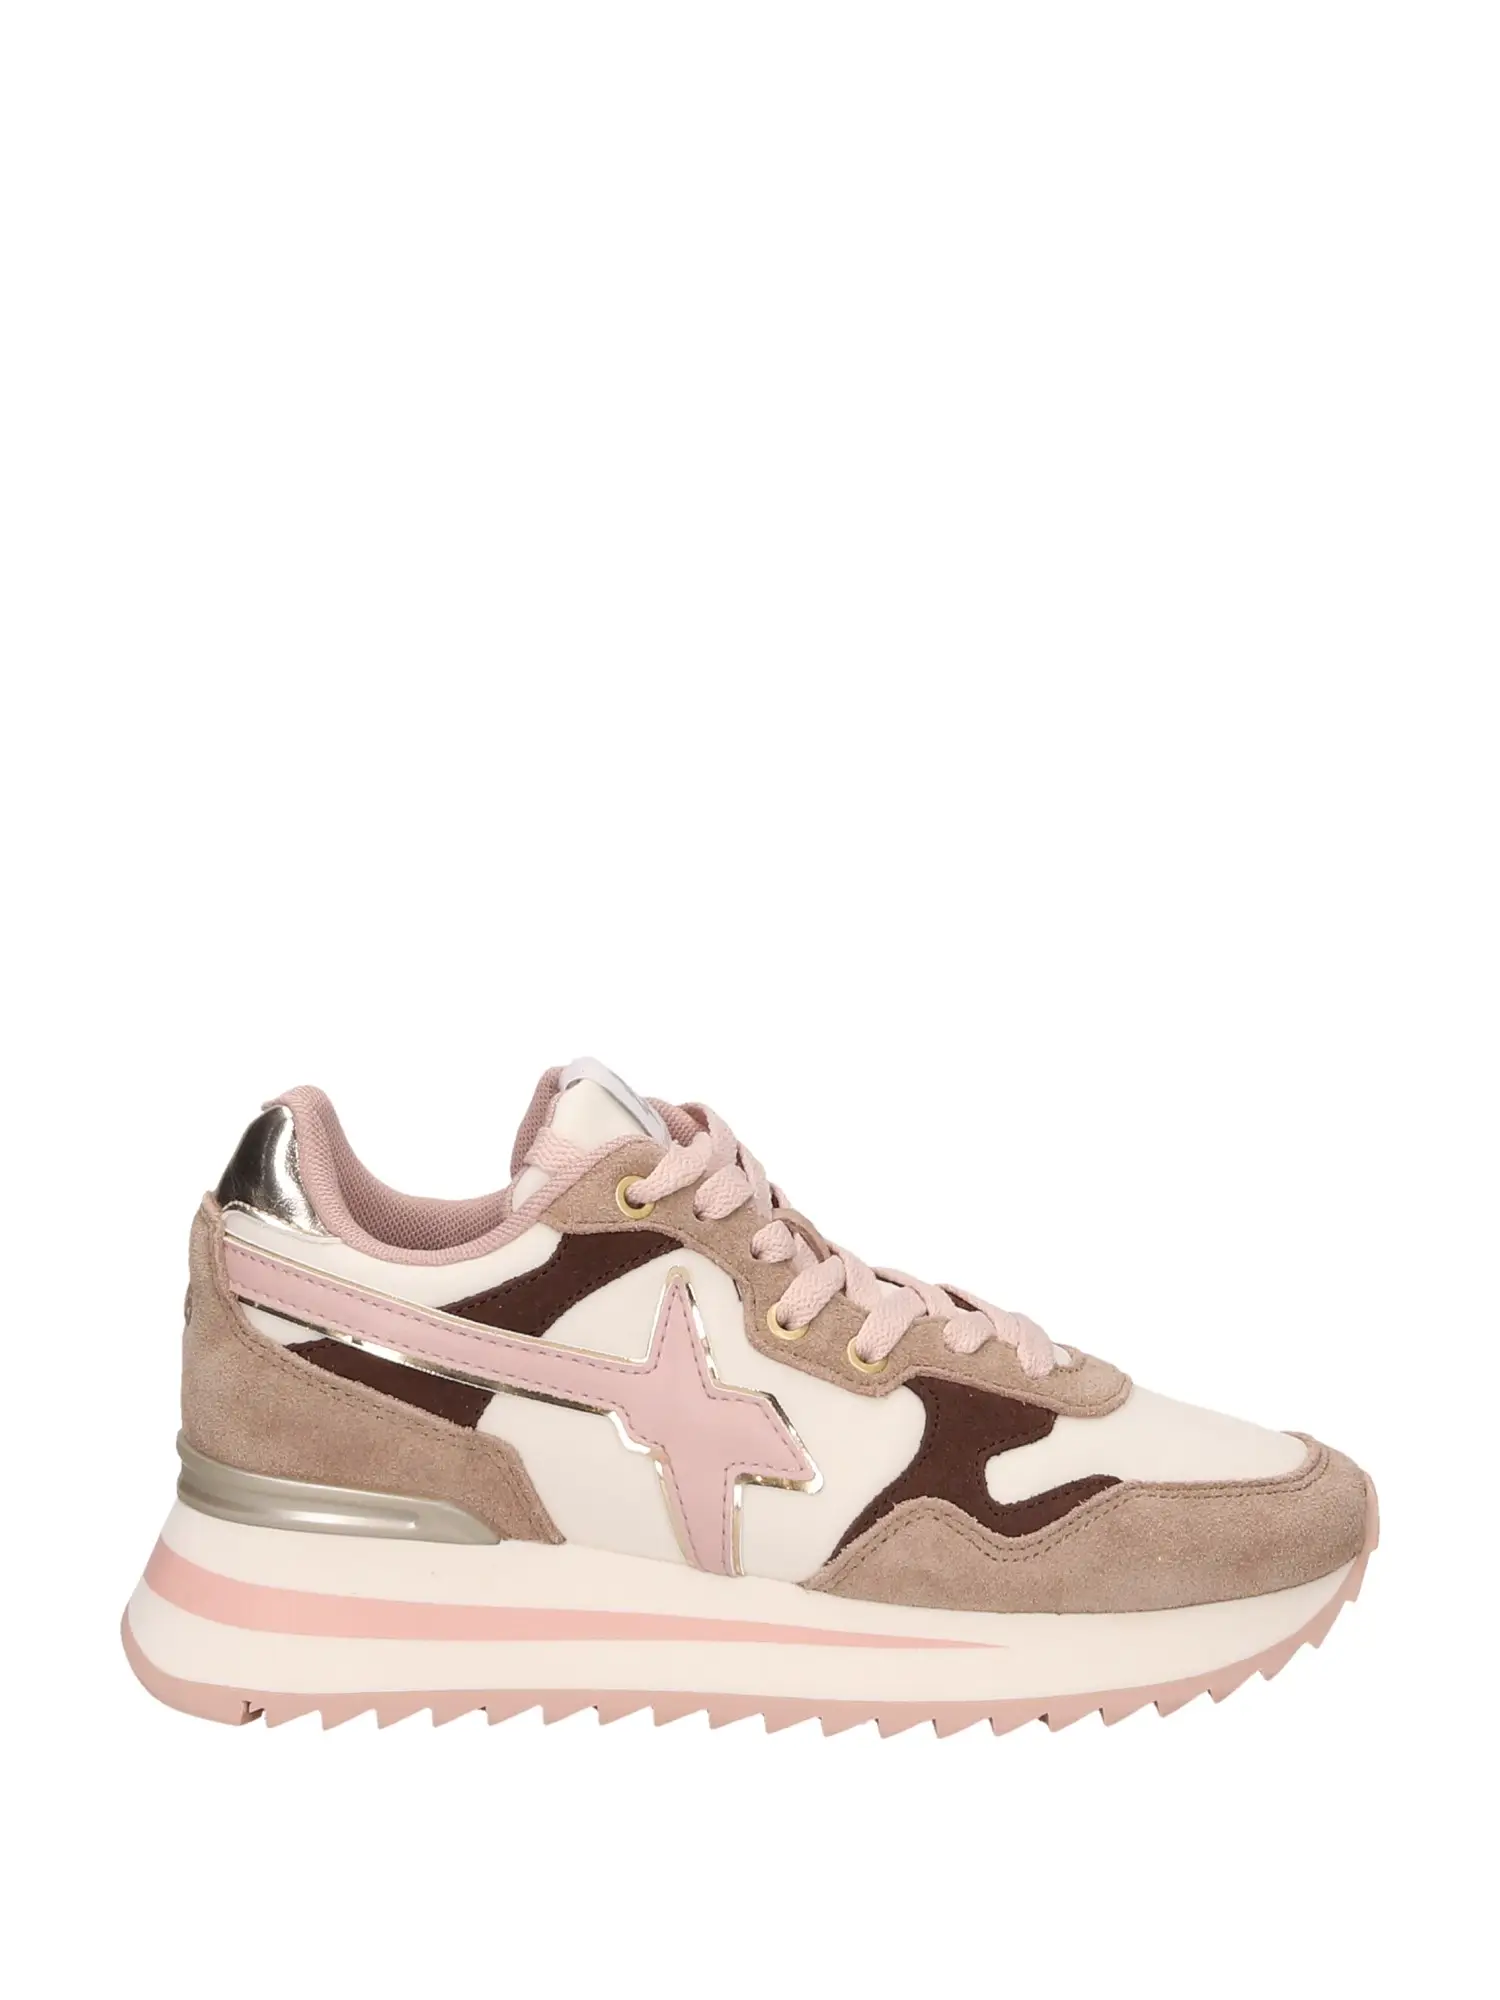 SNEAKERS DONNA - W6YZ - 0012016528.23 - TAUPE, 36